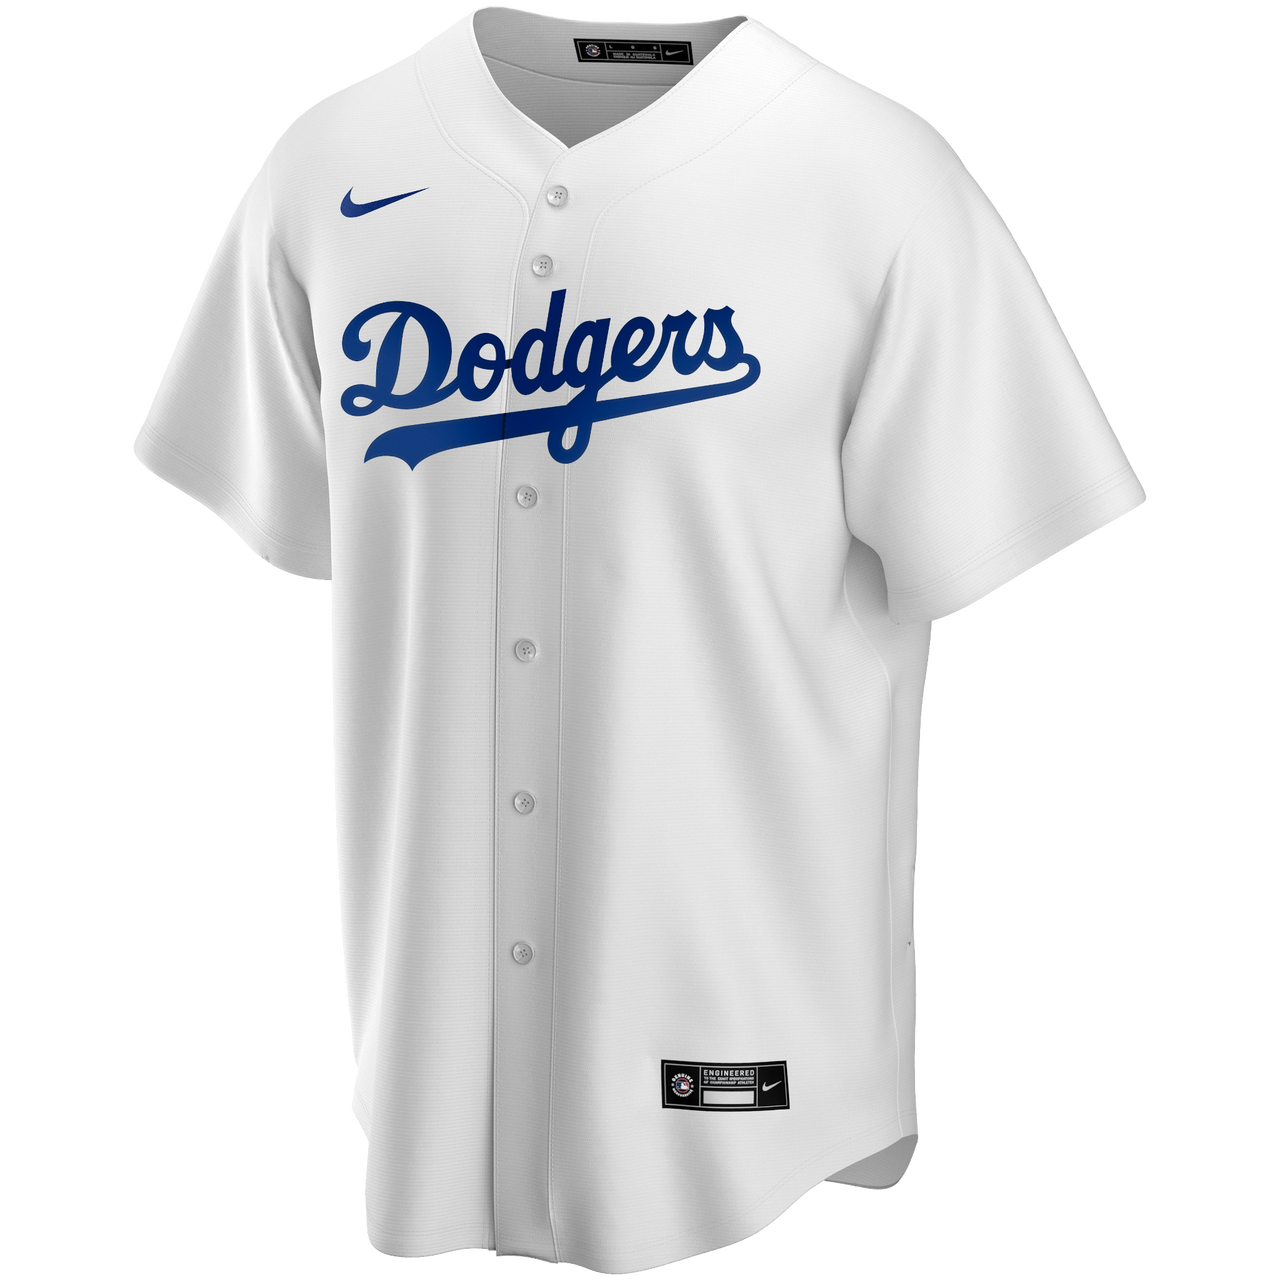 Dodgers Nation Milestone Giveaway: Win an Authentic Mookie Betts Jersey